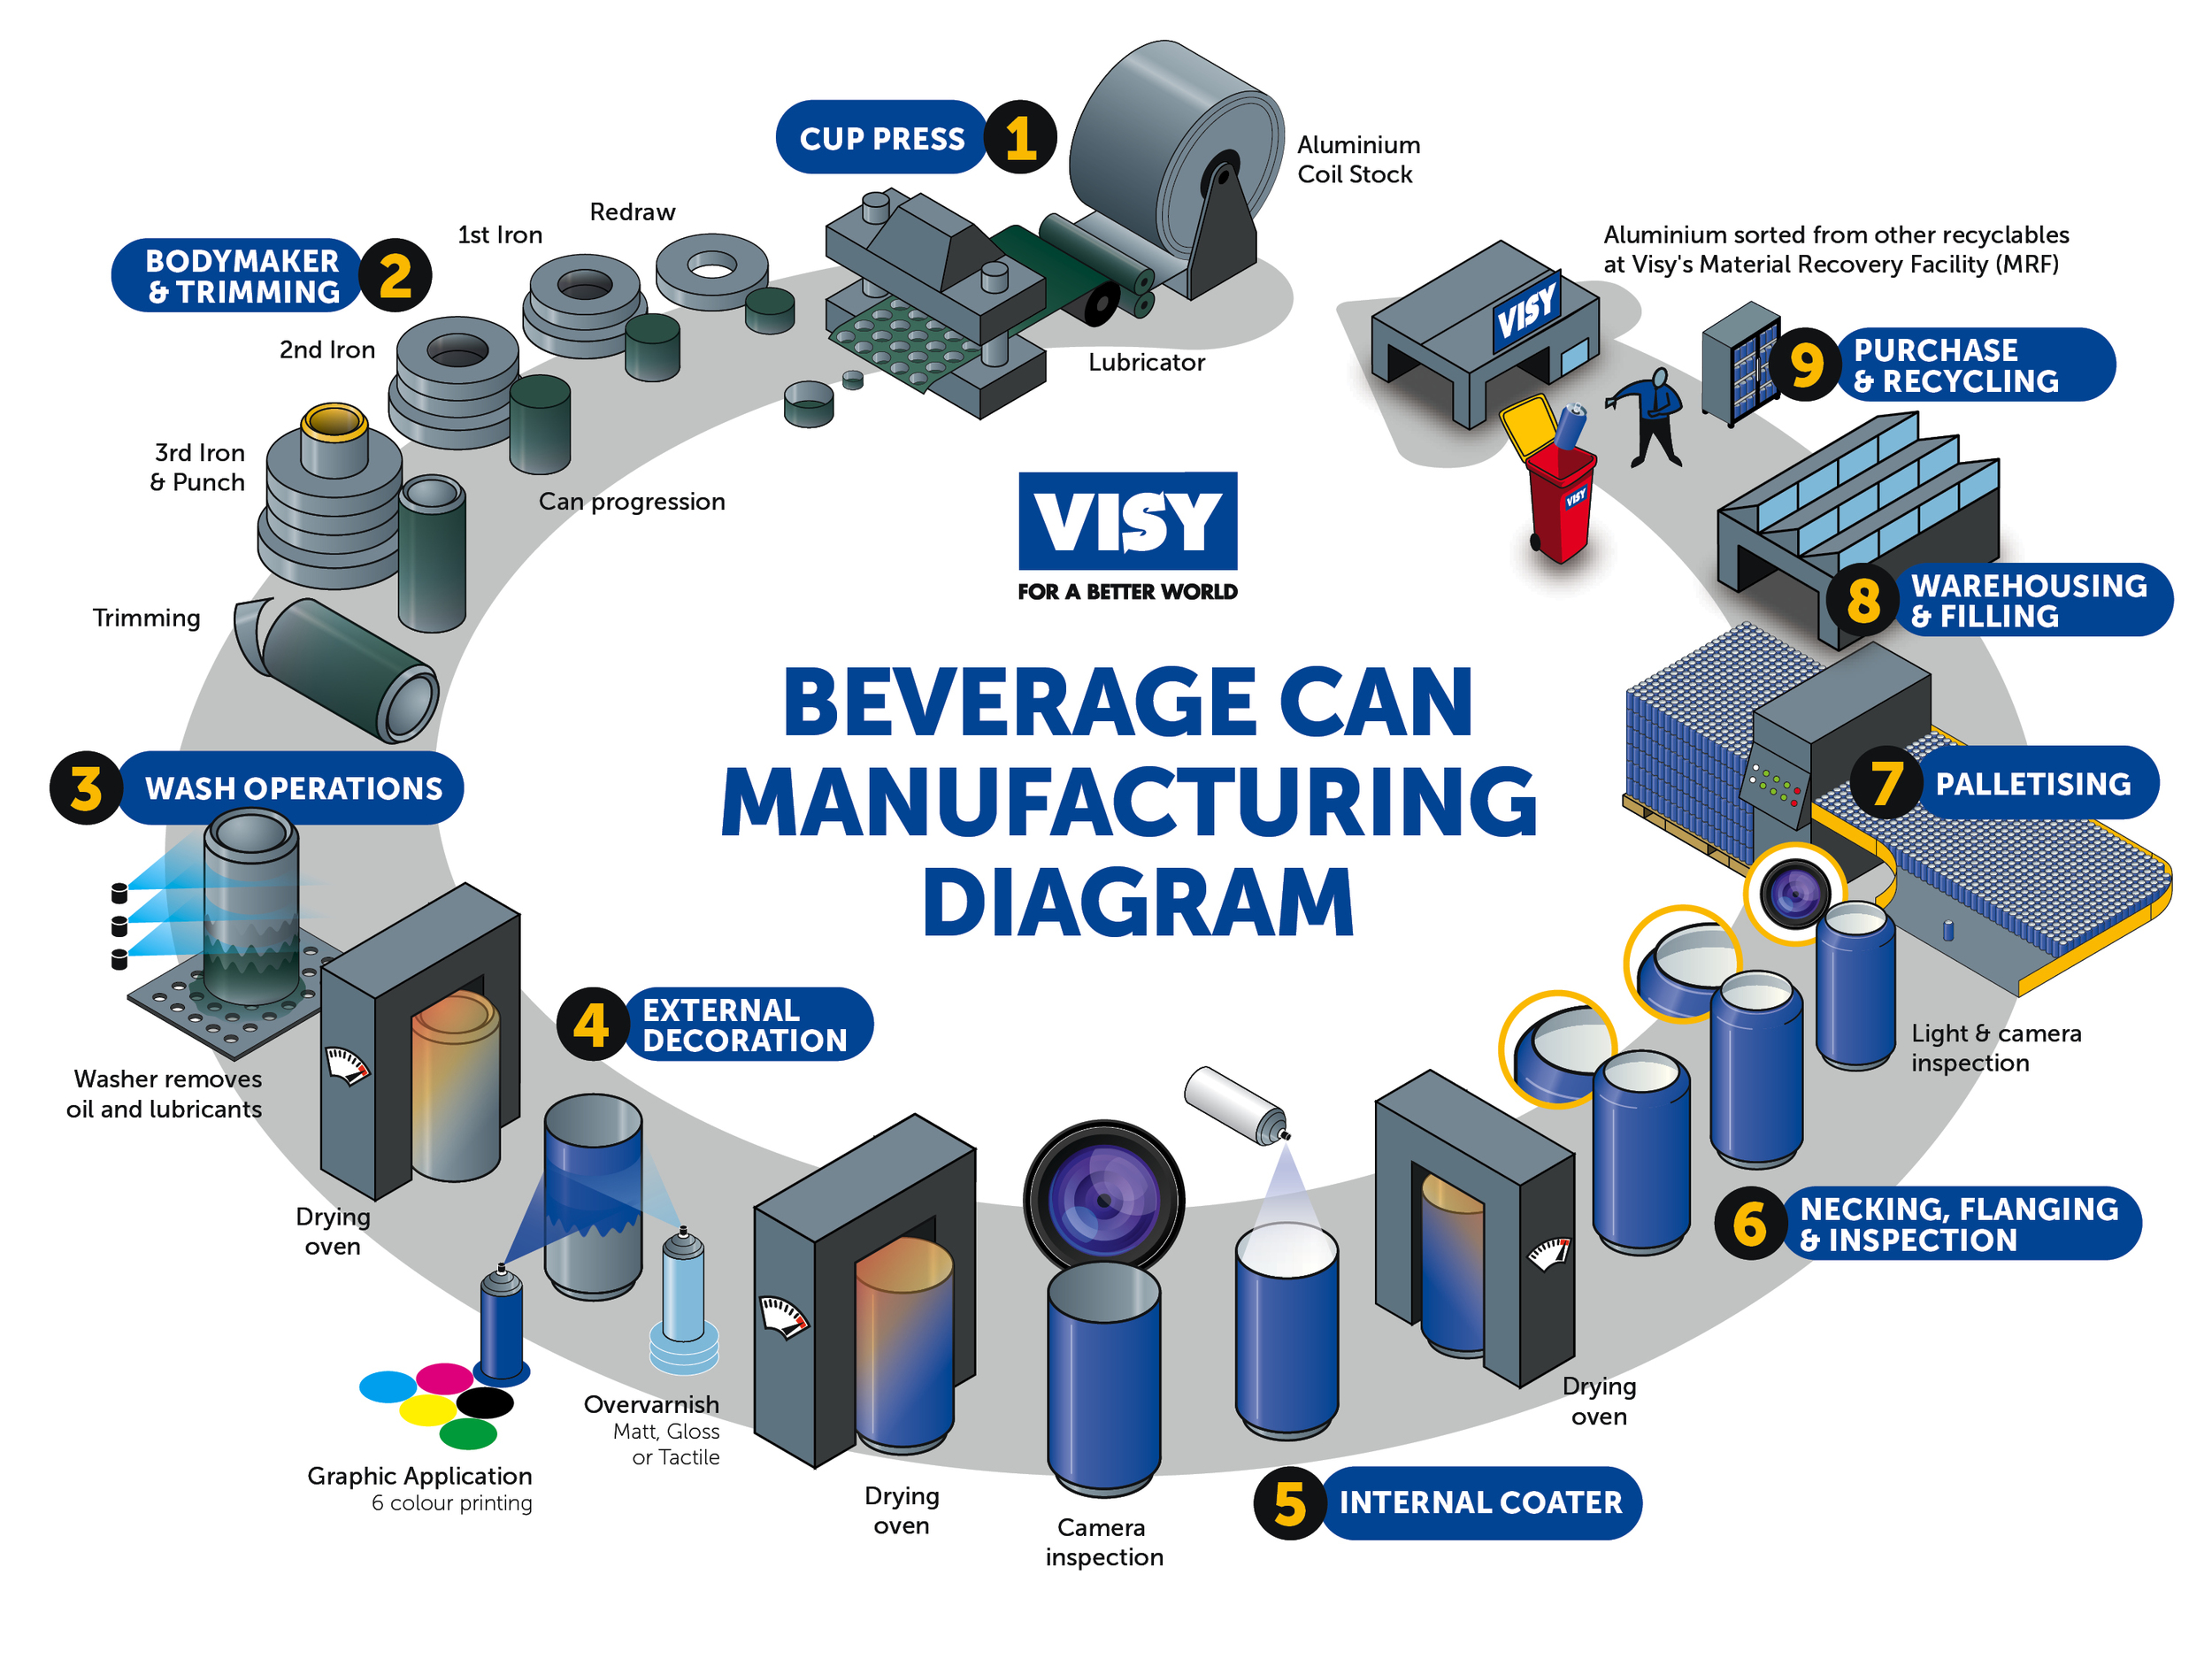 Visy Beverage Can Manufacturing